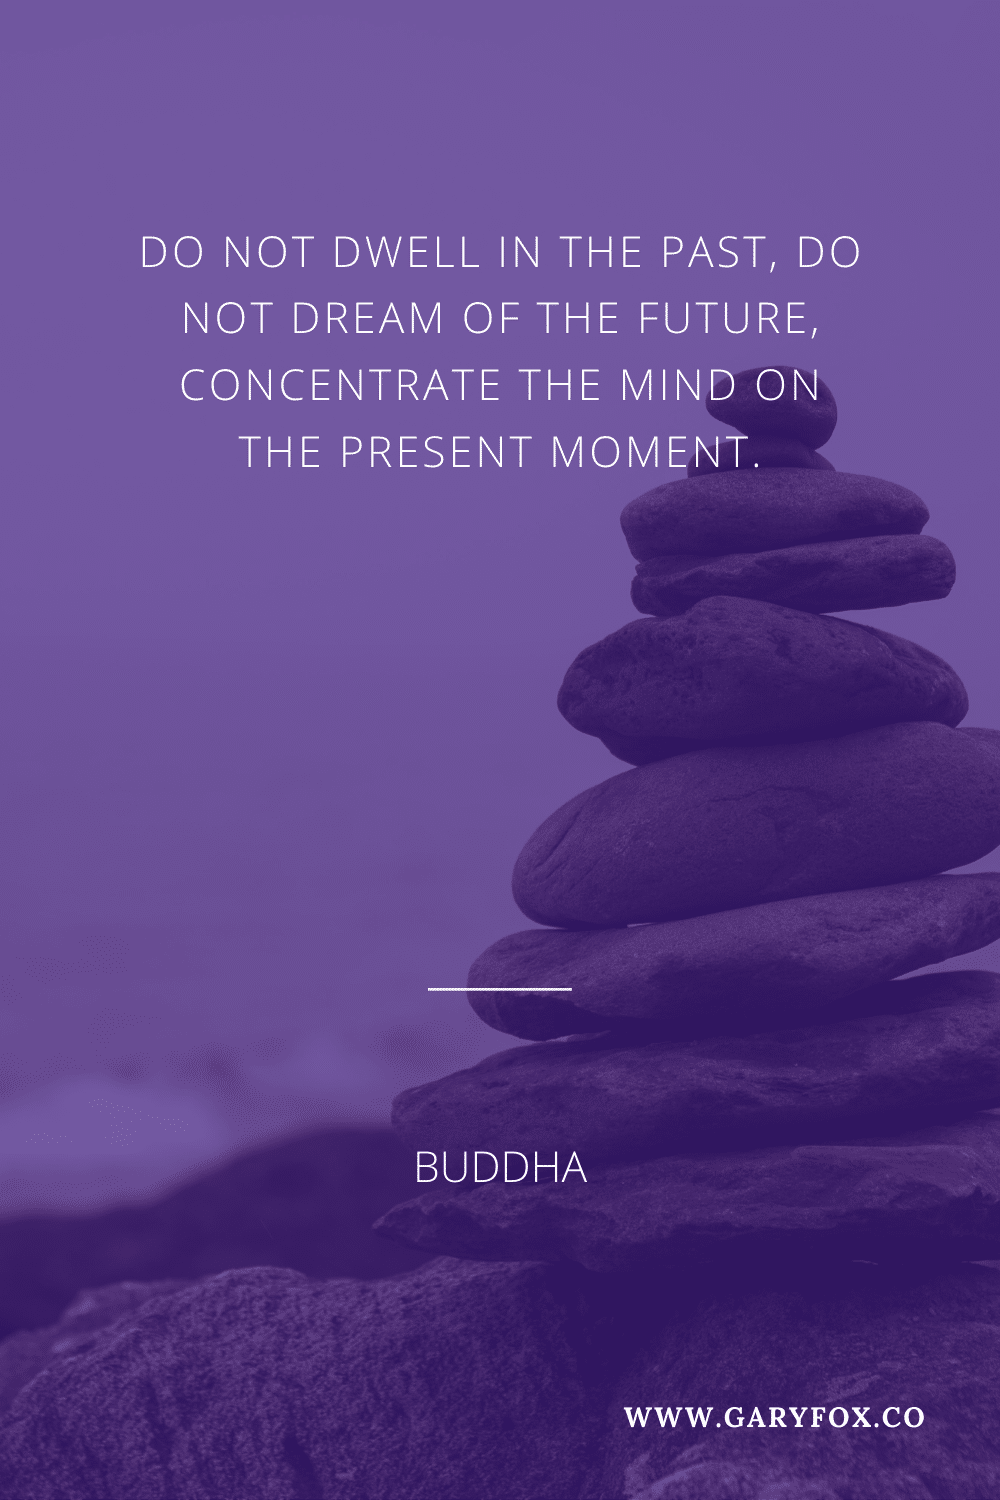 Do Not Dwell In The Past, Do Not Dream Of The Future, Concentrate The Mind On The Present Moment.